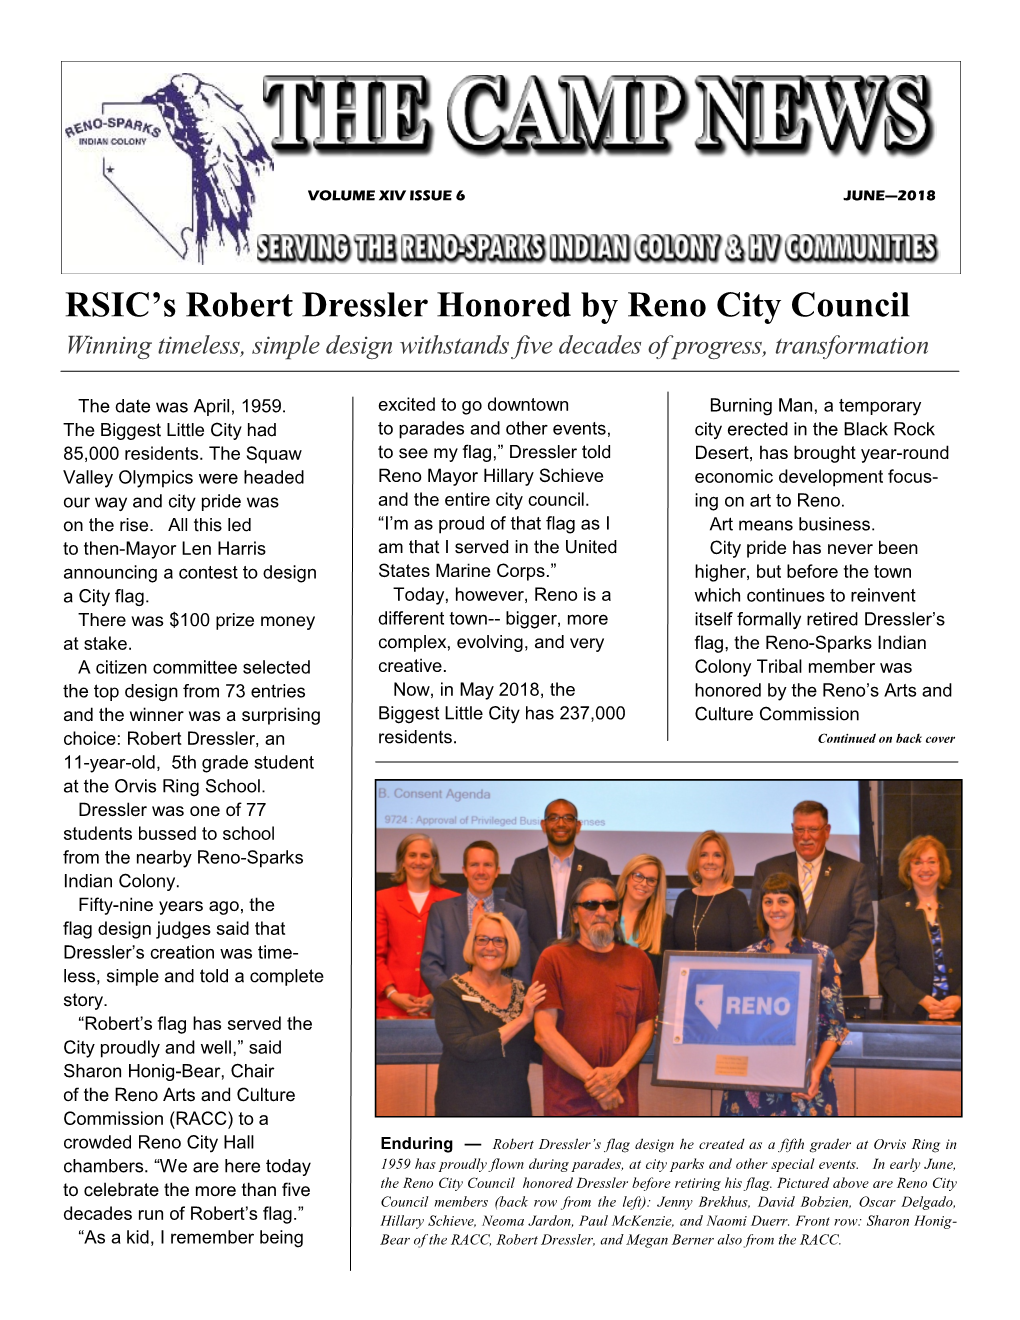 RSIC's Robert Dressler Honored by Reno City Council